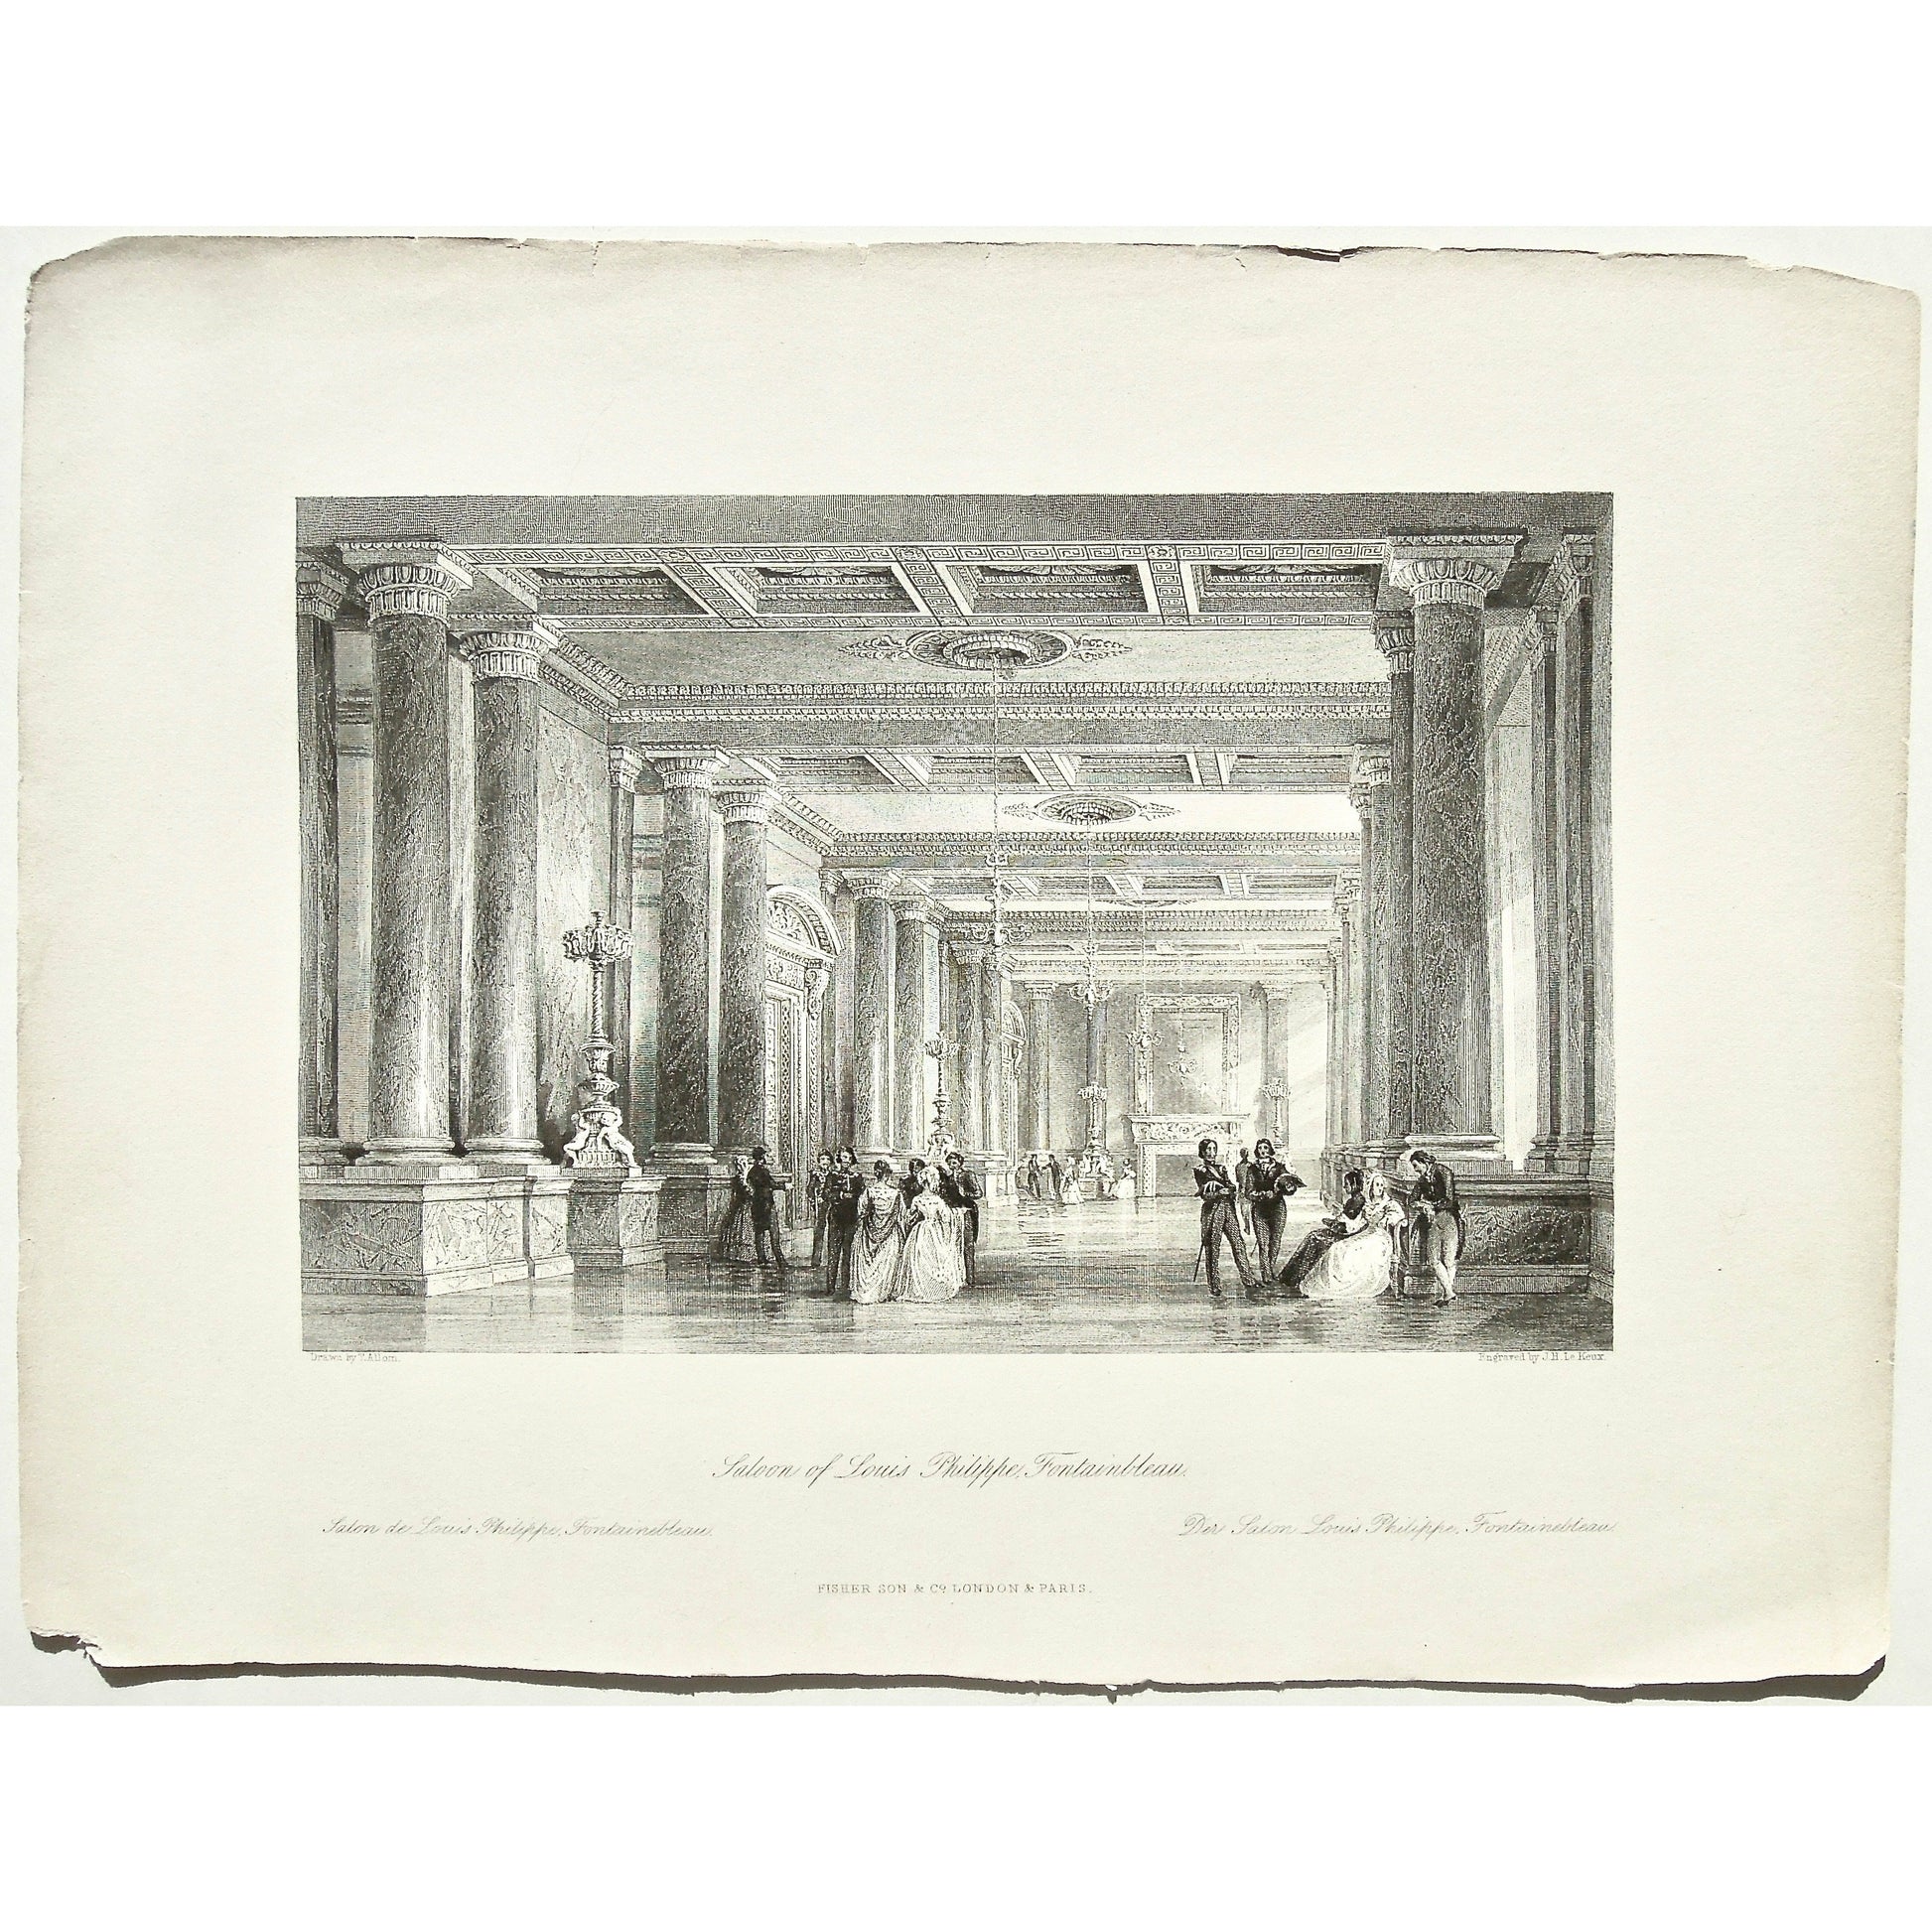 Saloon of Louis Philippe, Fontainebleau, Salon, Louis Philippe, Ornamental ceiling, Ceiling, Pillars, Events, Socializing, Party, Royal, Marble, coffered Ceiling, Coffered, Ornamental, Costume, Dress, Attire, Hall, Chandelier, France, France Illustrated, Exhibiting its Landscape Scenery, Antiquities, Military and Ecclesiastical Architecture, Thomas Allom, Allom, Fisher, Son & Co., London, Paris, Reverend George Newenham, Newenham, Caxton Press, Angel St., Martin's-Le-Grand, Mandeville, Neuve Vivienne, 1845,